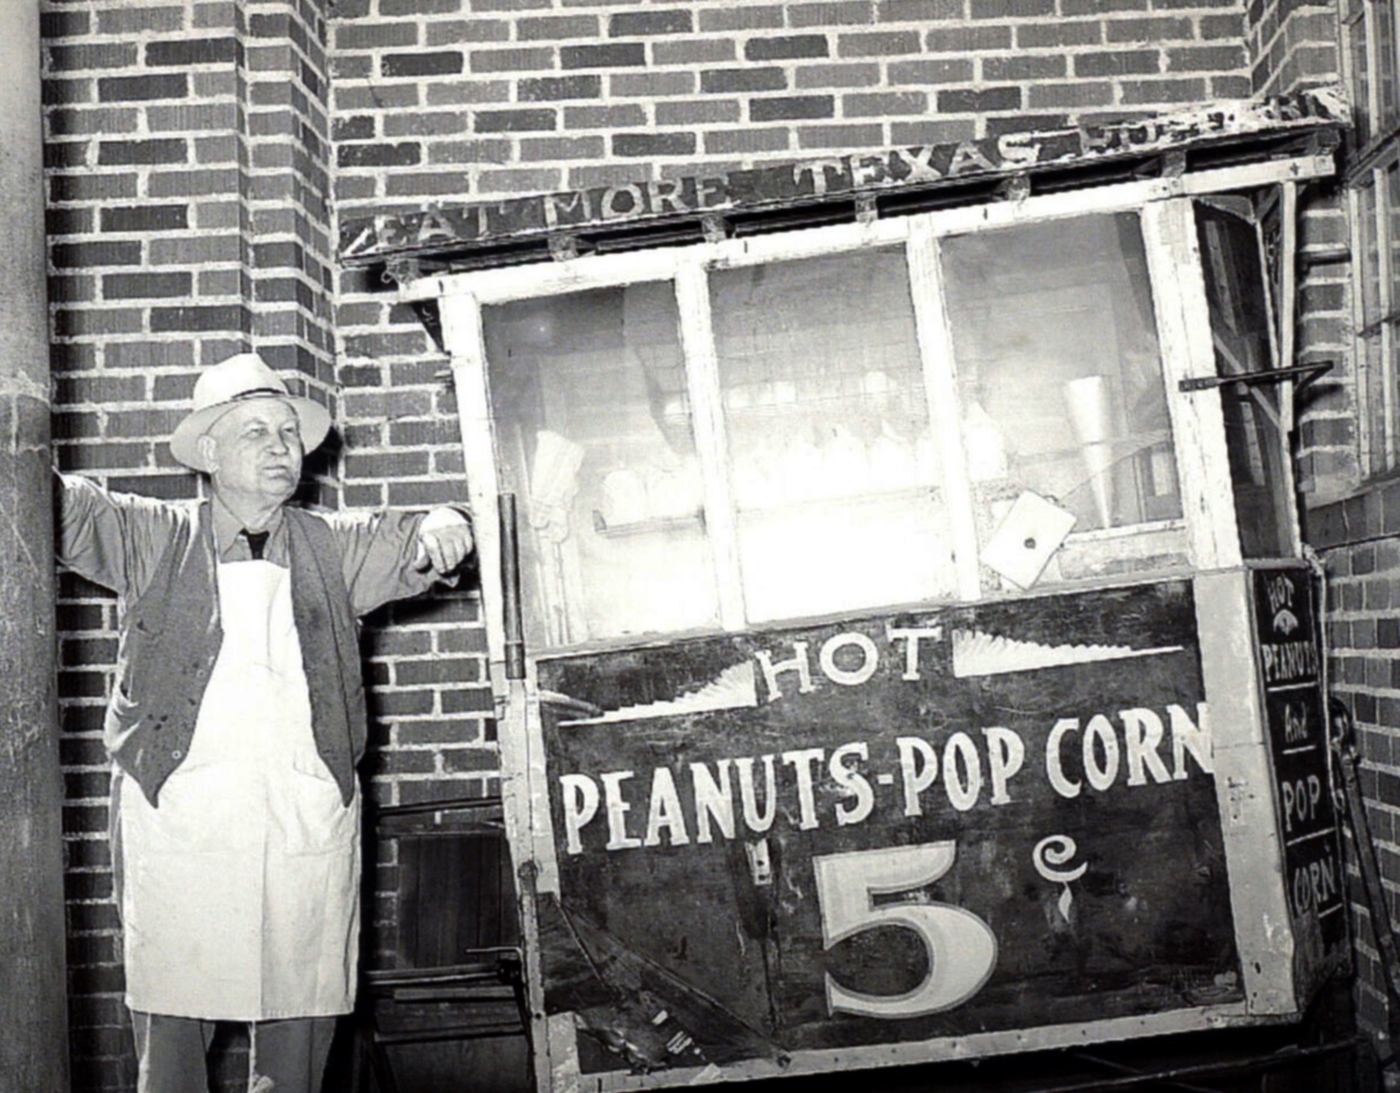 San Angelo Hot Peanuts and Popcorn Cart in 1940